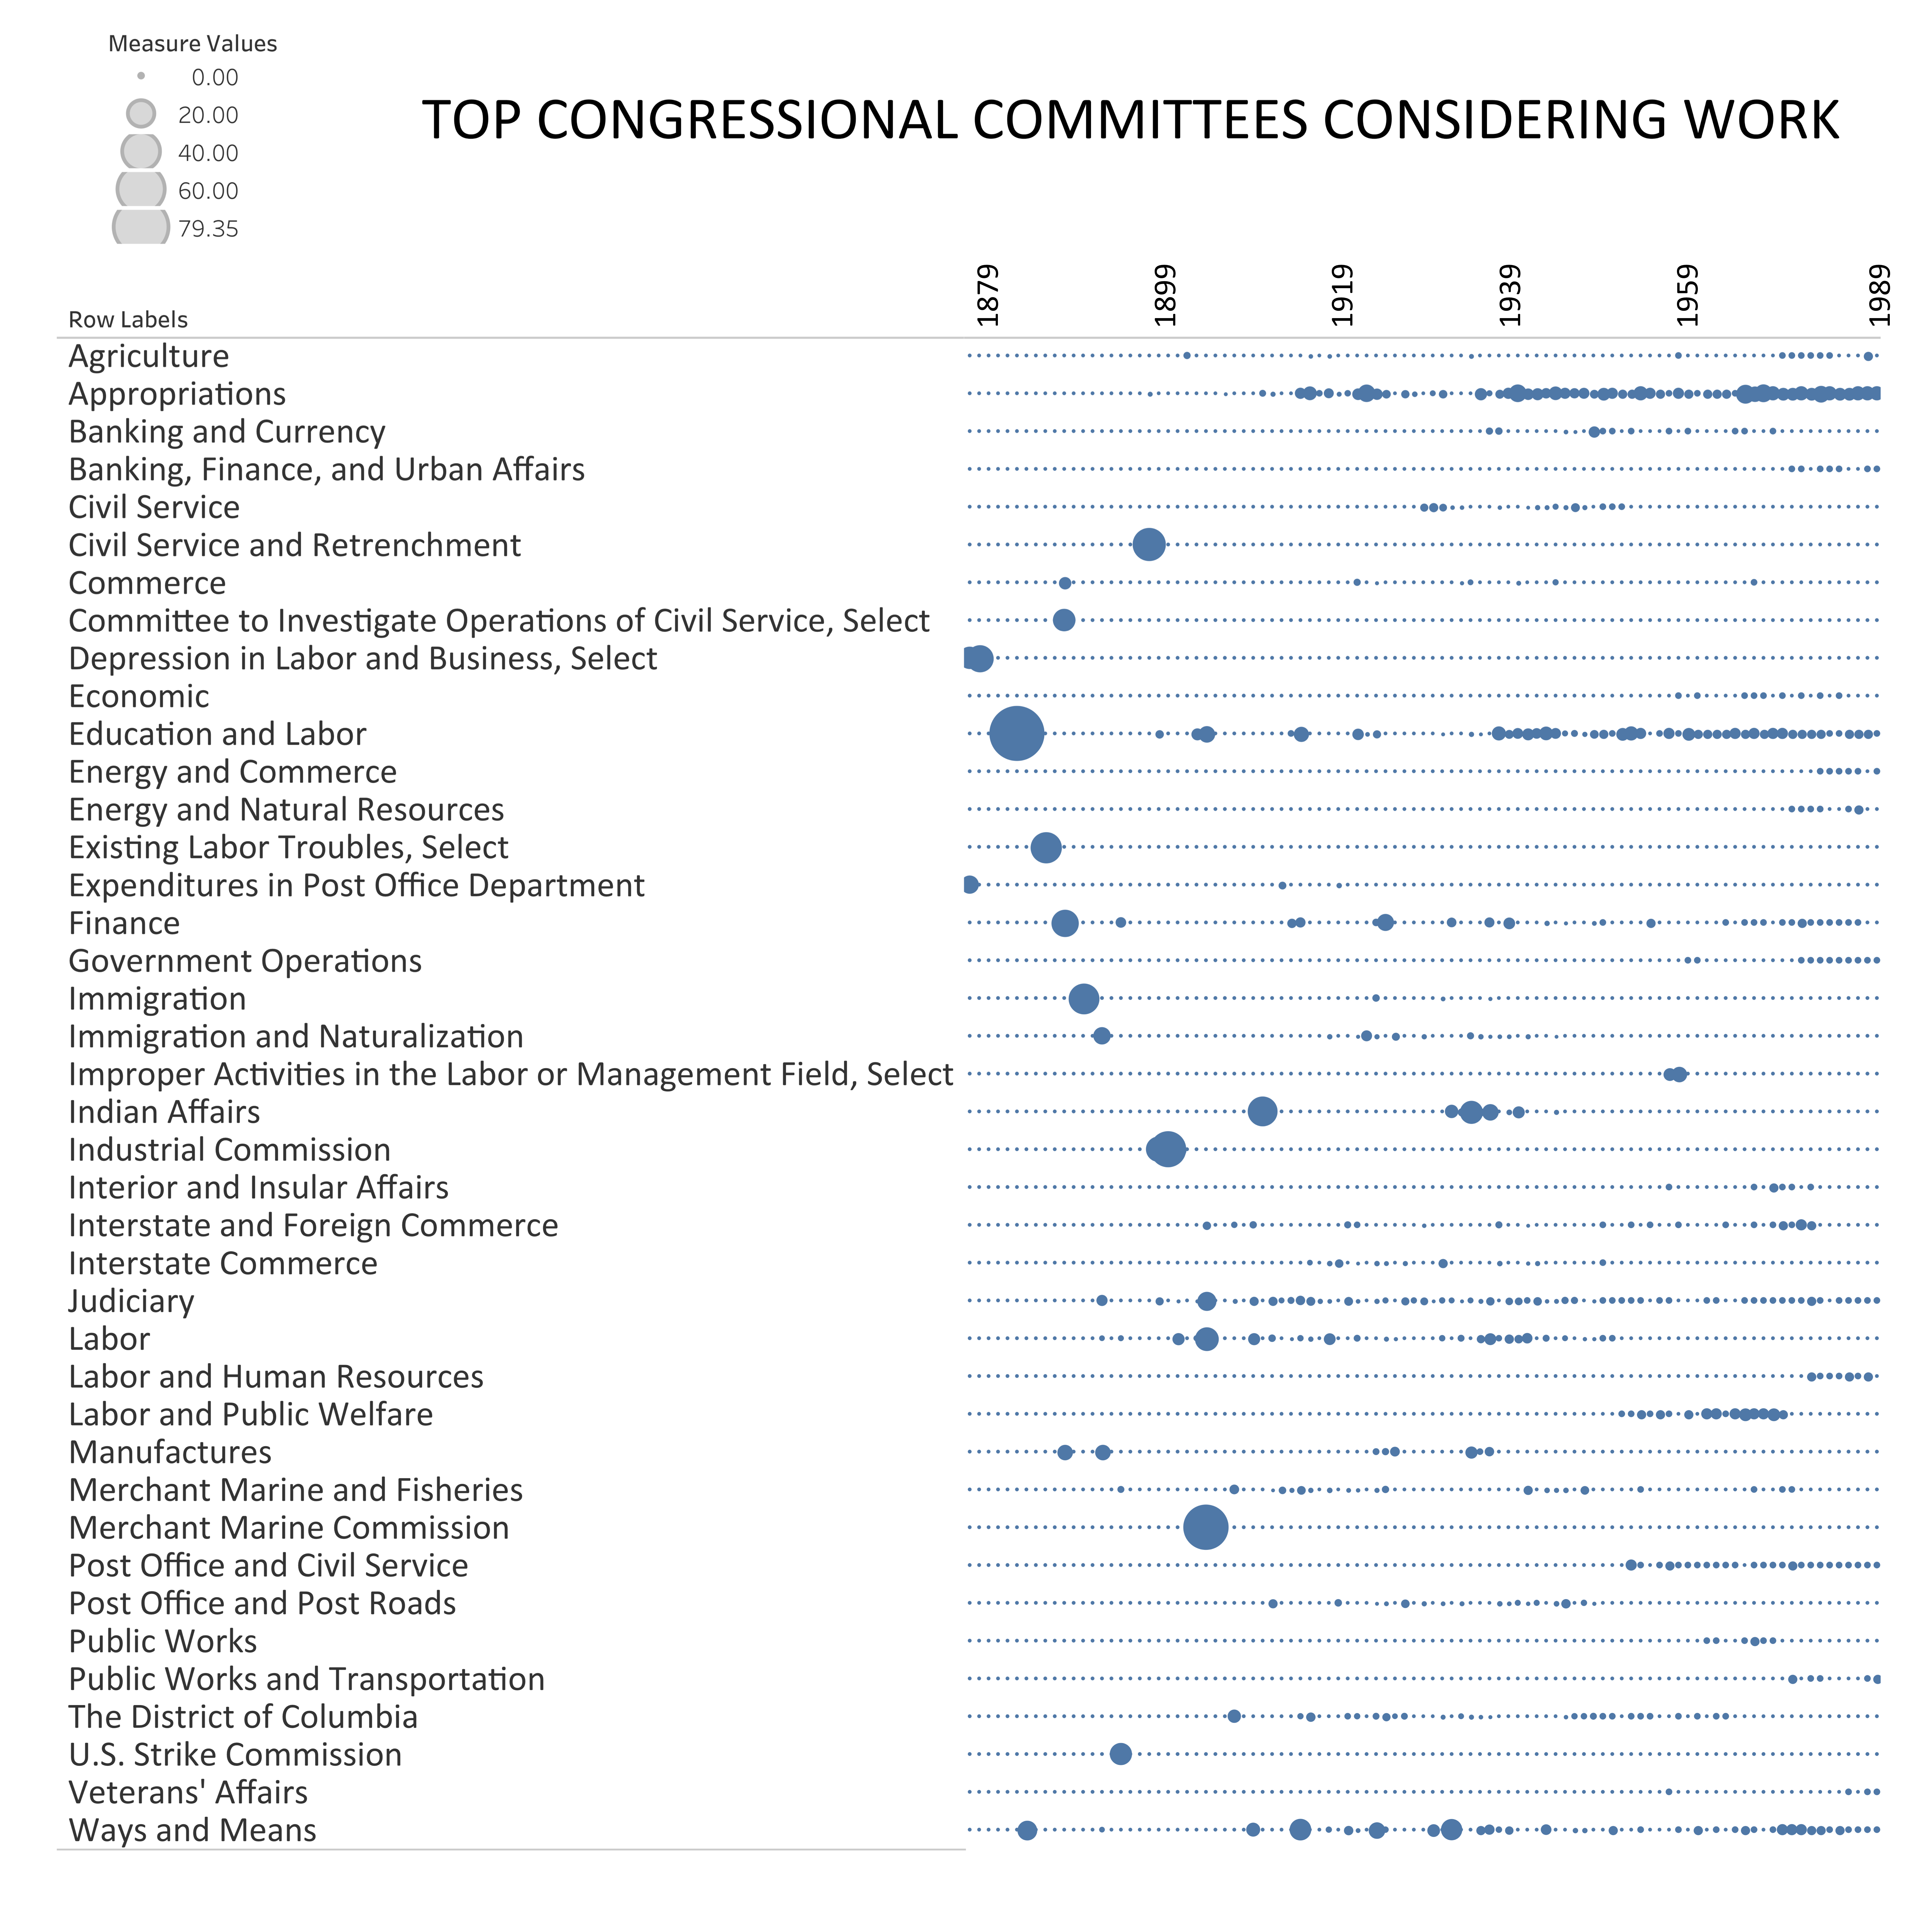 Bubble chart showing the top congressional committees considering work and related matters  from eighteen seventy-eight to nineteen ninety.